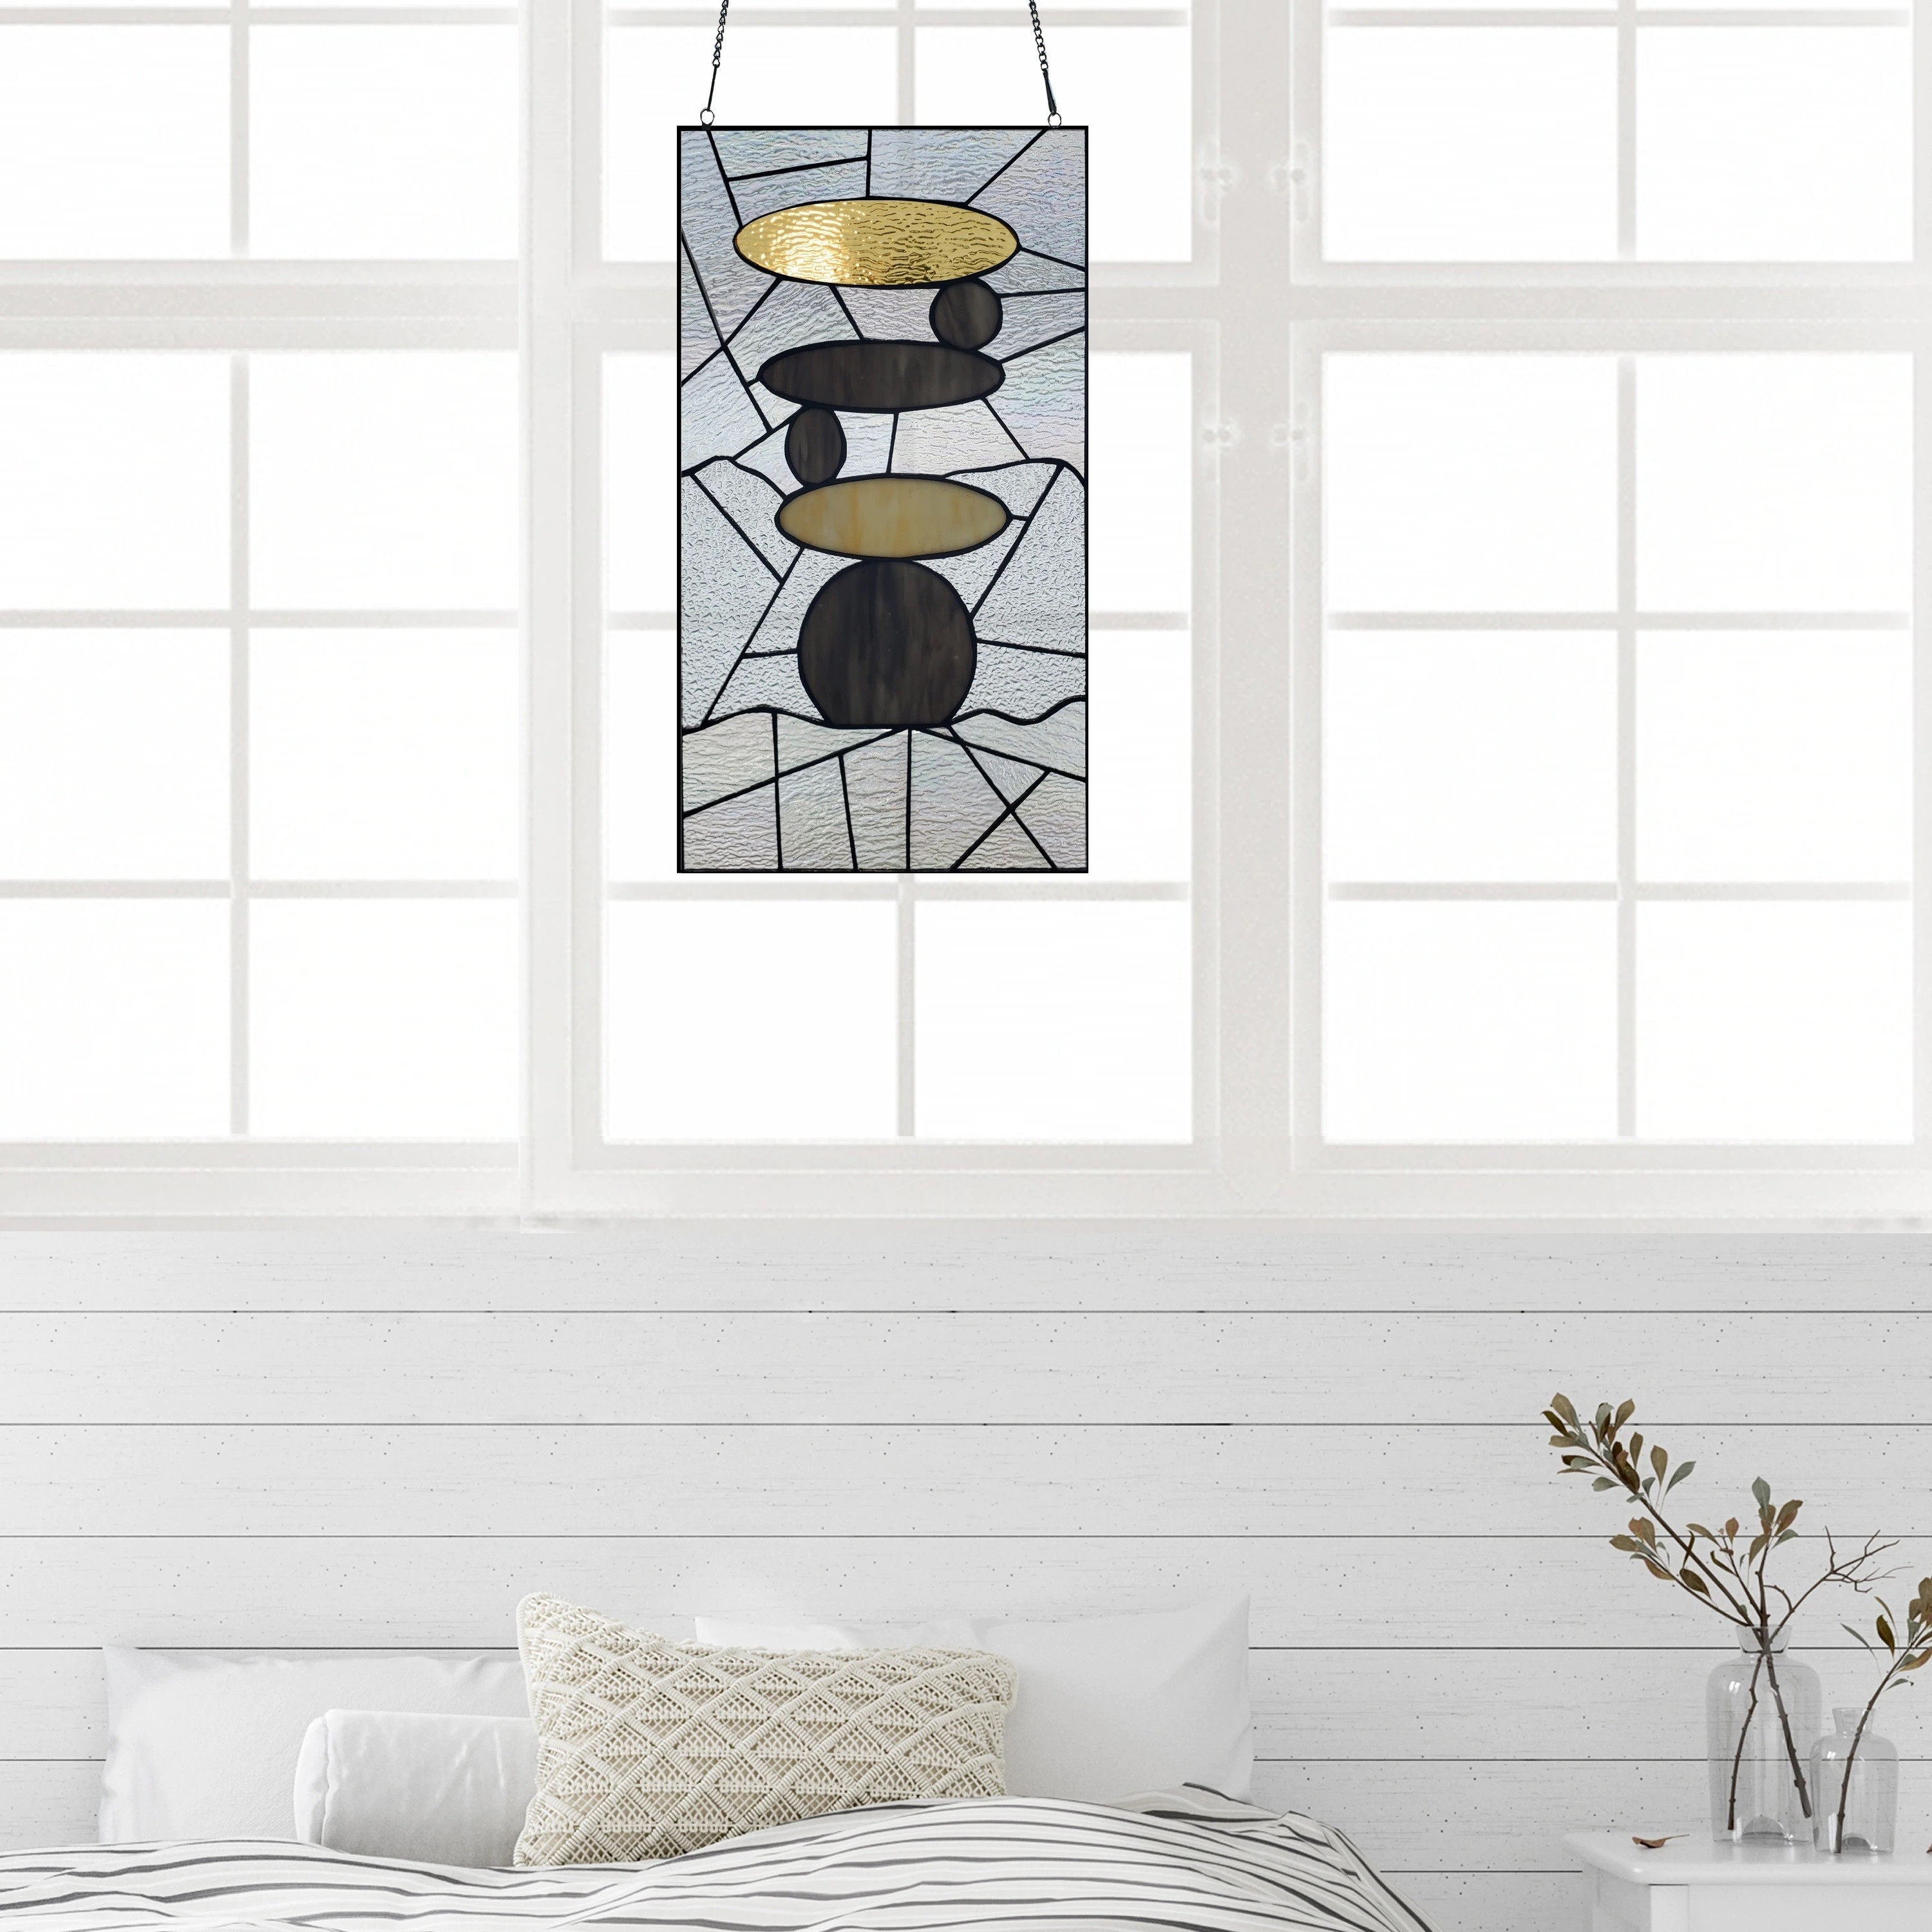 Add a touch of Zen with unique stained glass patterns